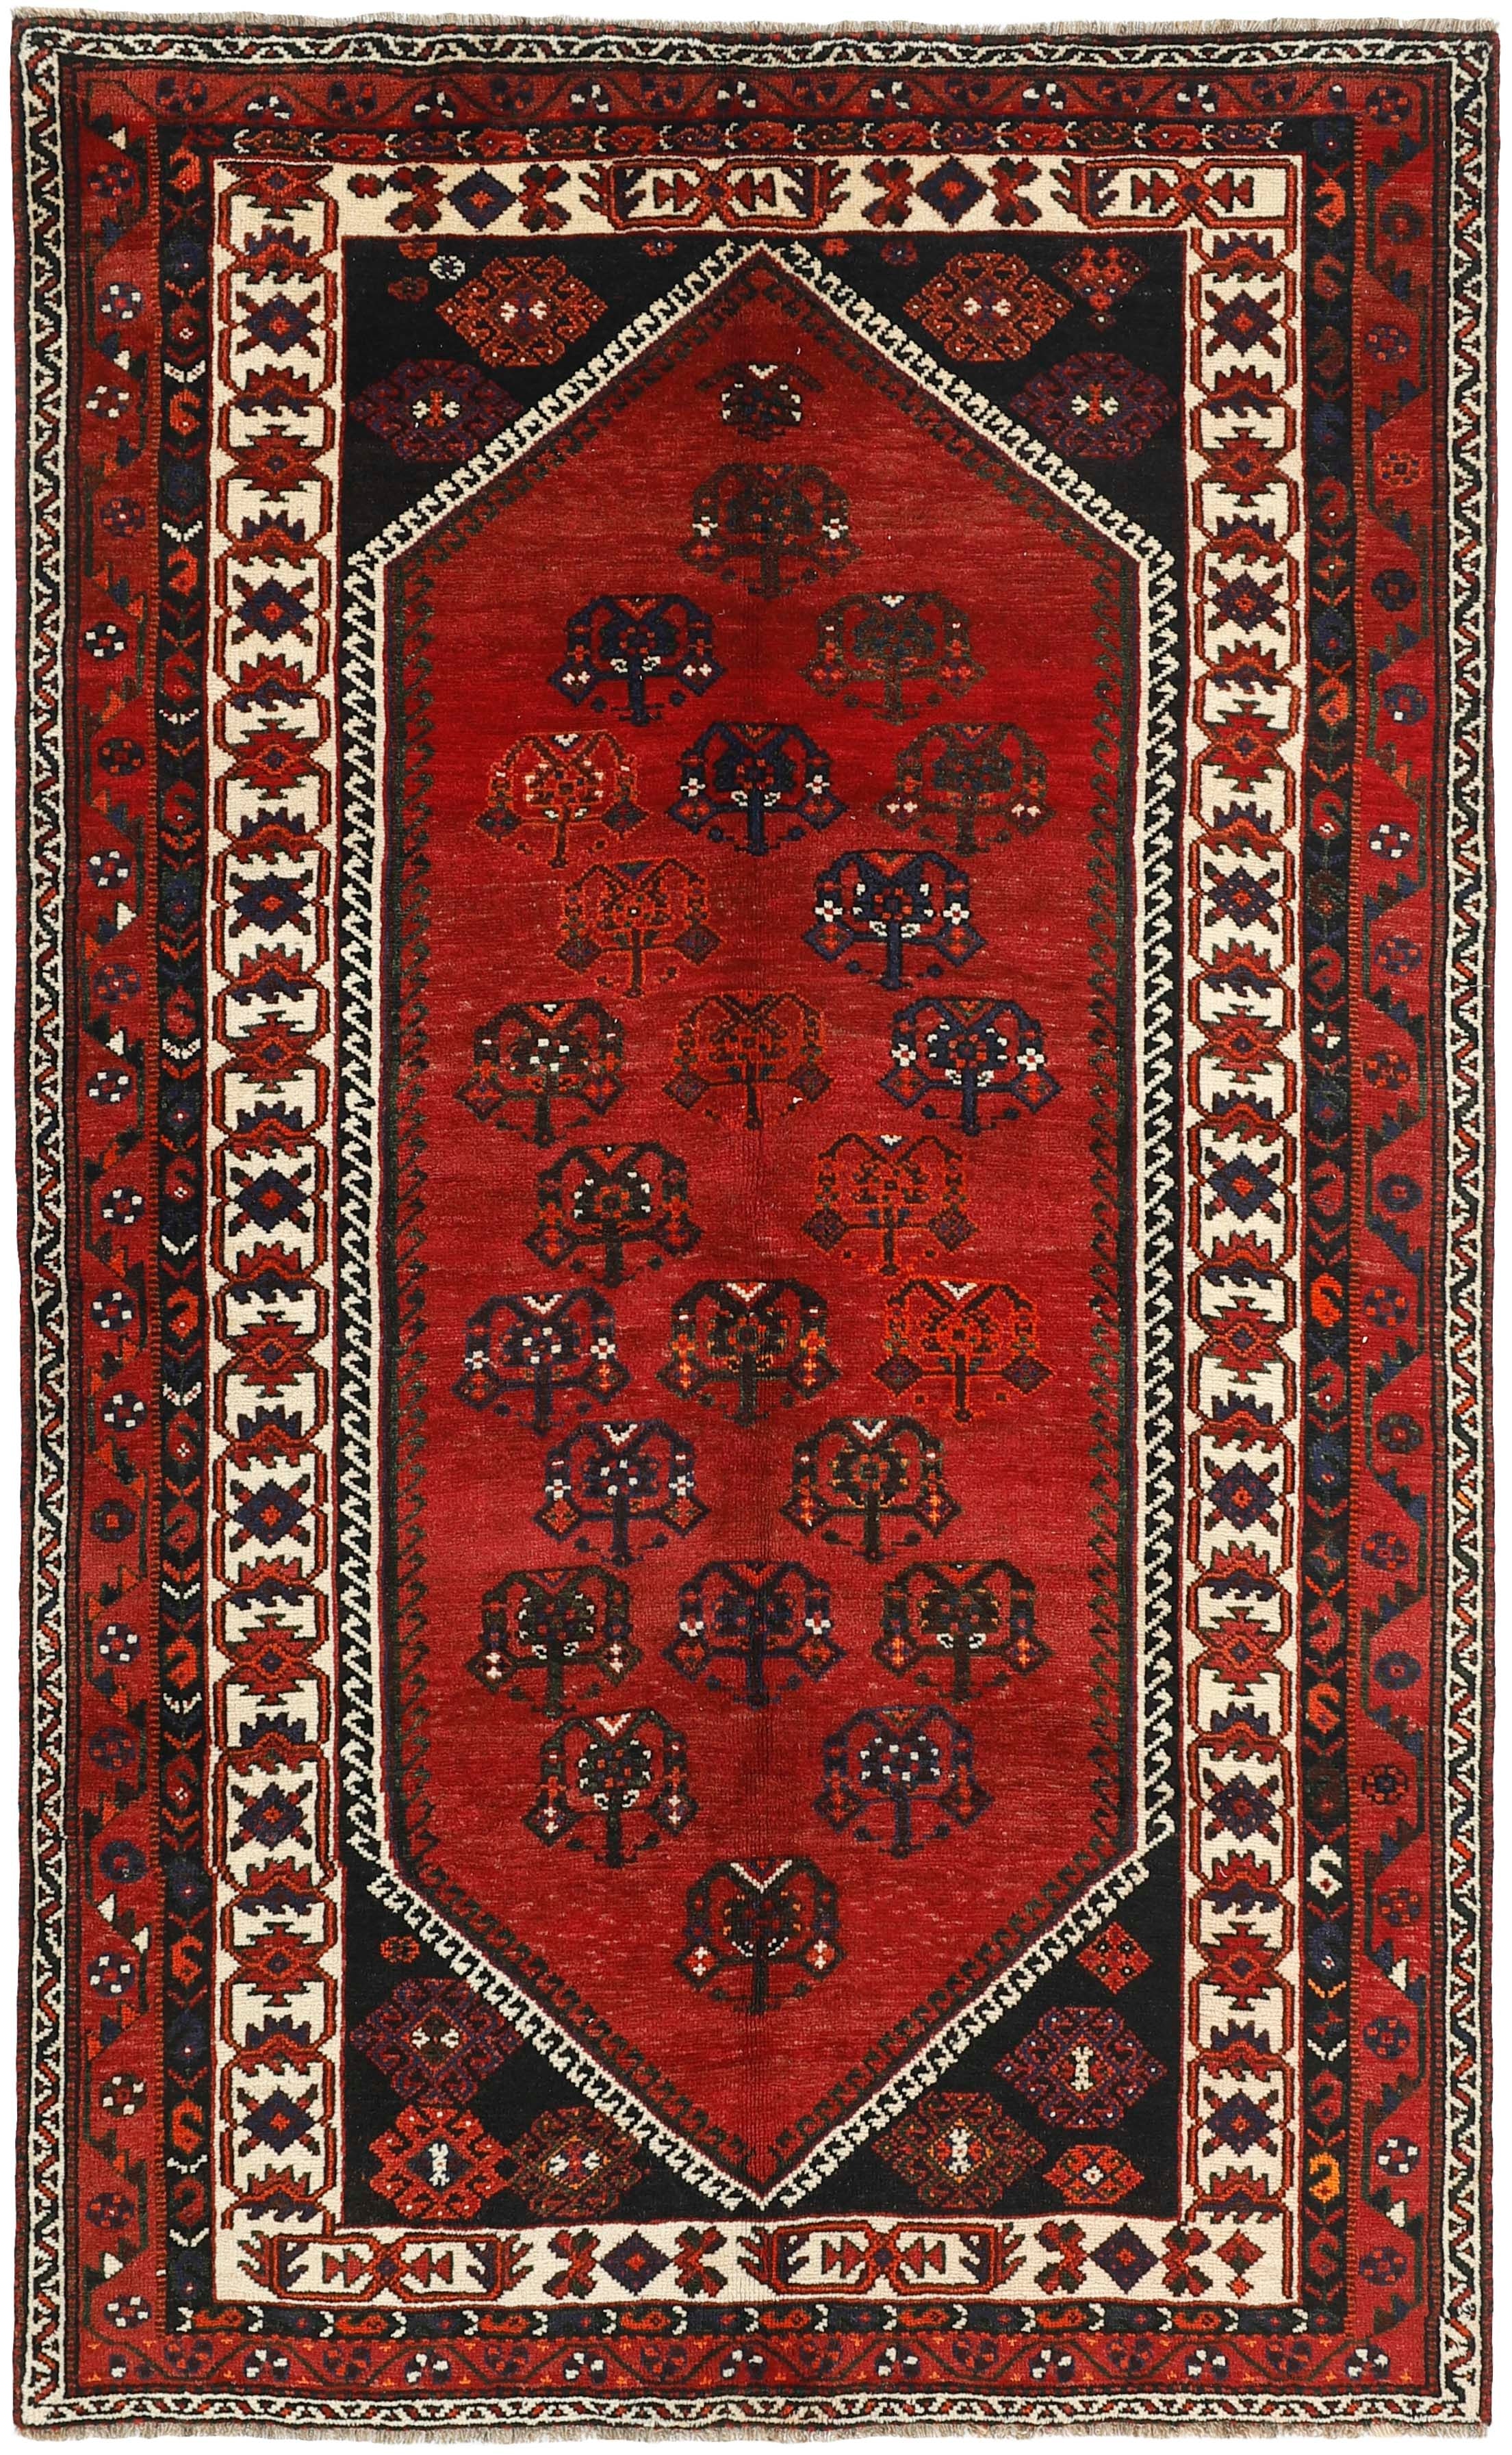 Authentic persian rug with a traditional tribal geometric pattern in red, black and ivory